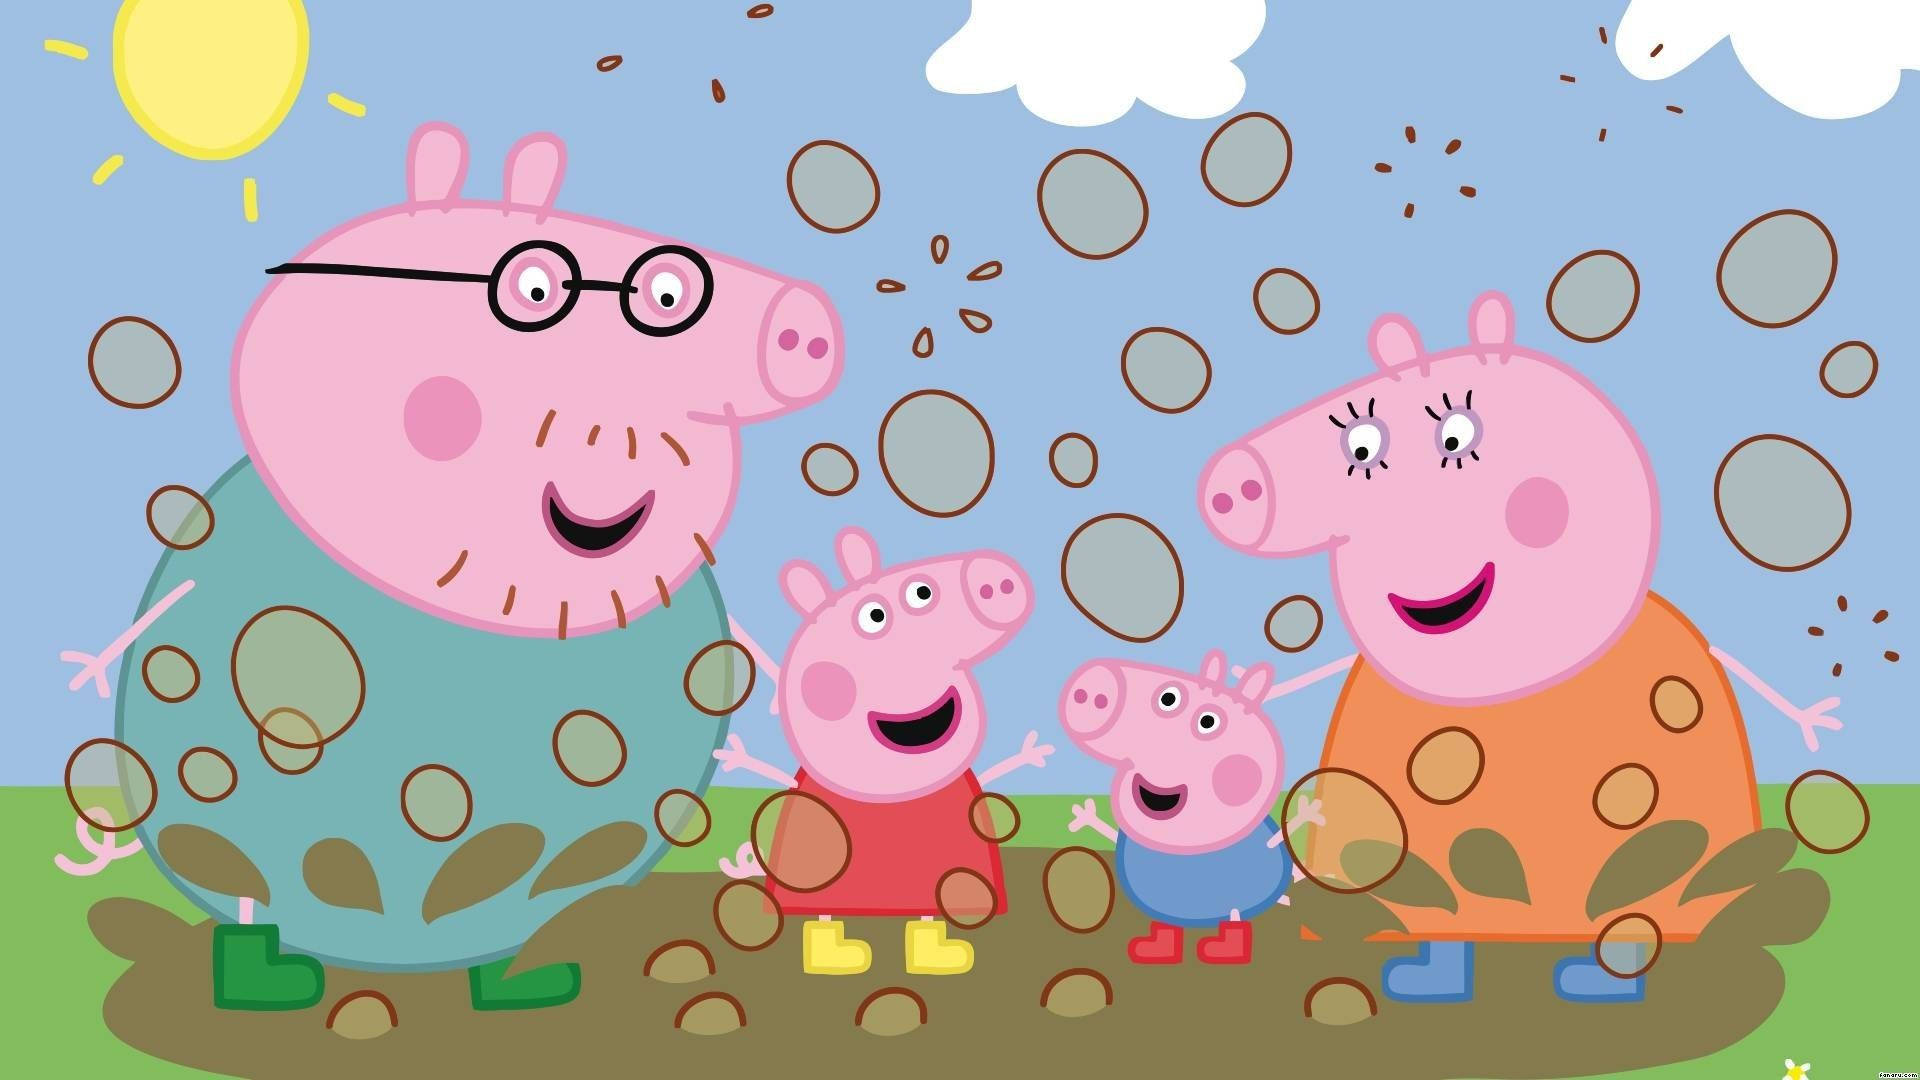 Peppa Pig and her family jumping in muddy puddles. Wallpaper